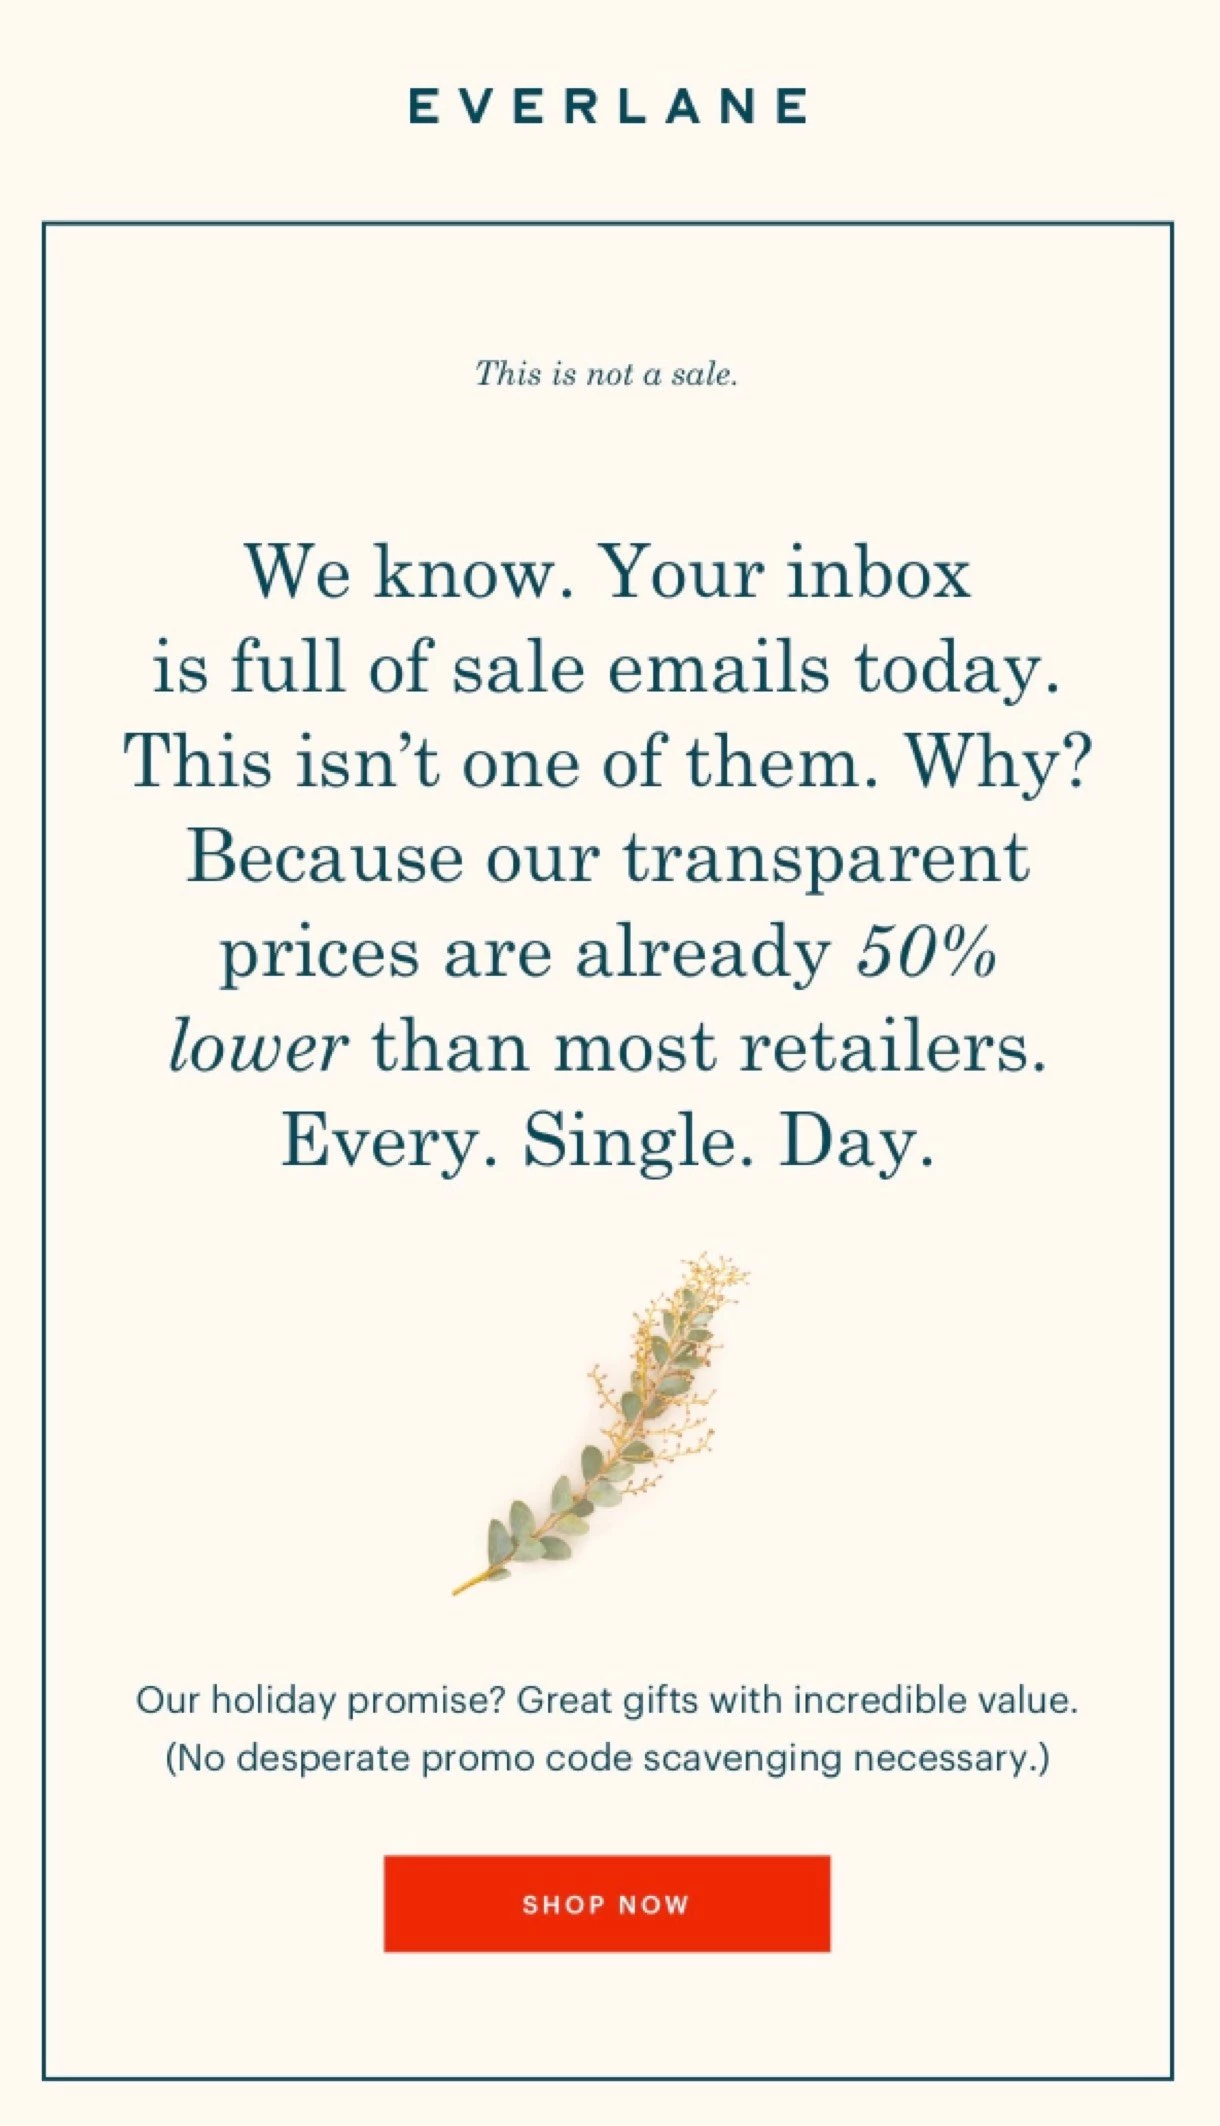 Everlane Cyber Monday email